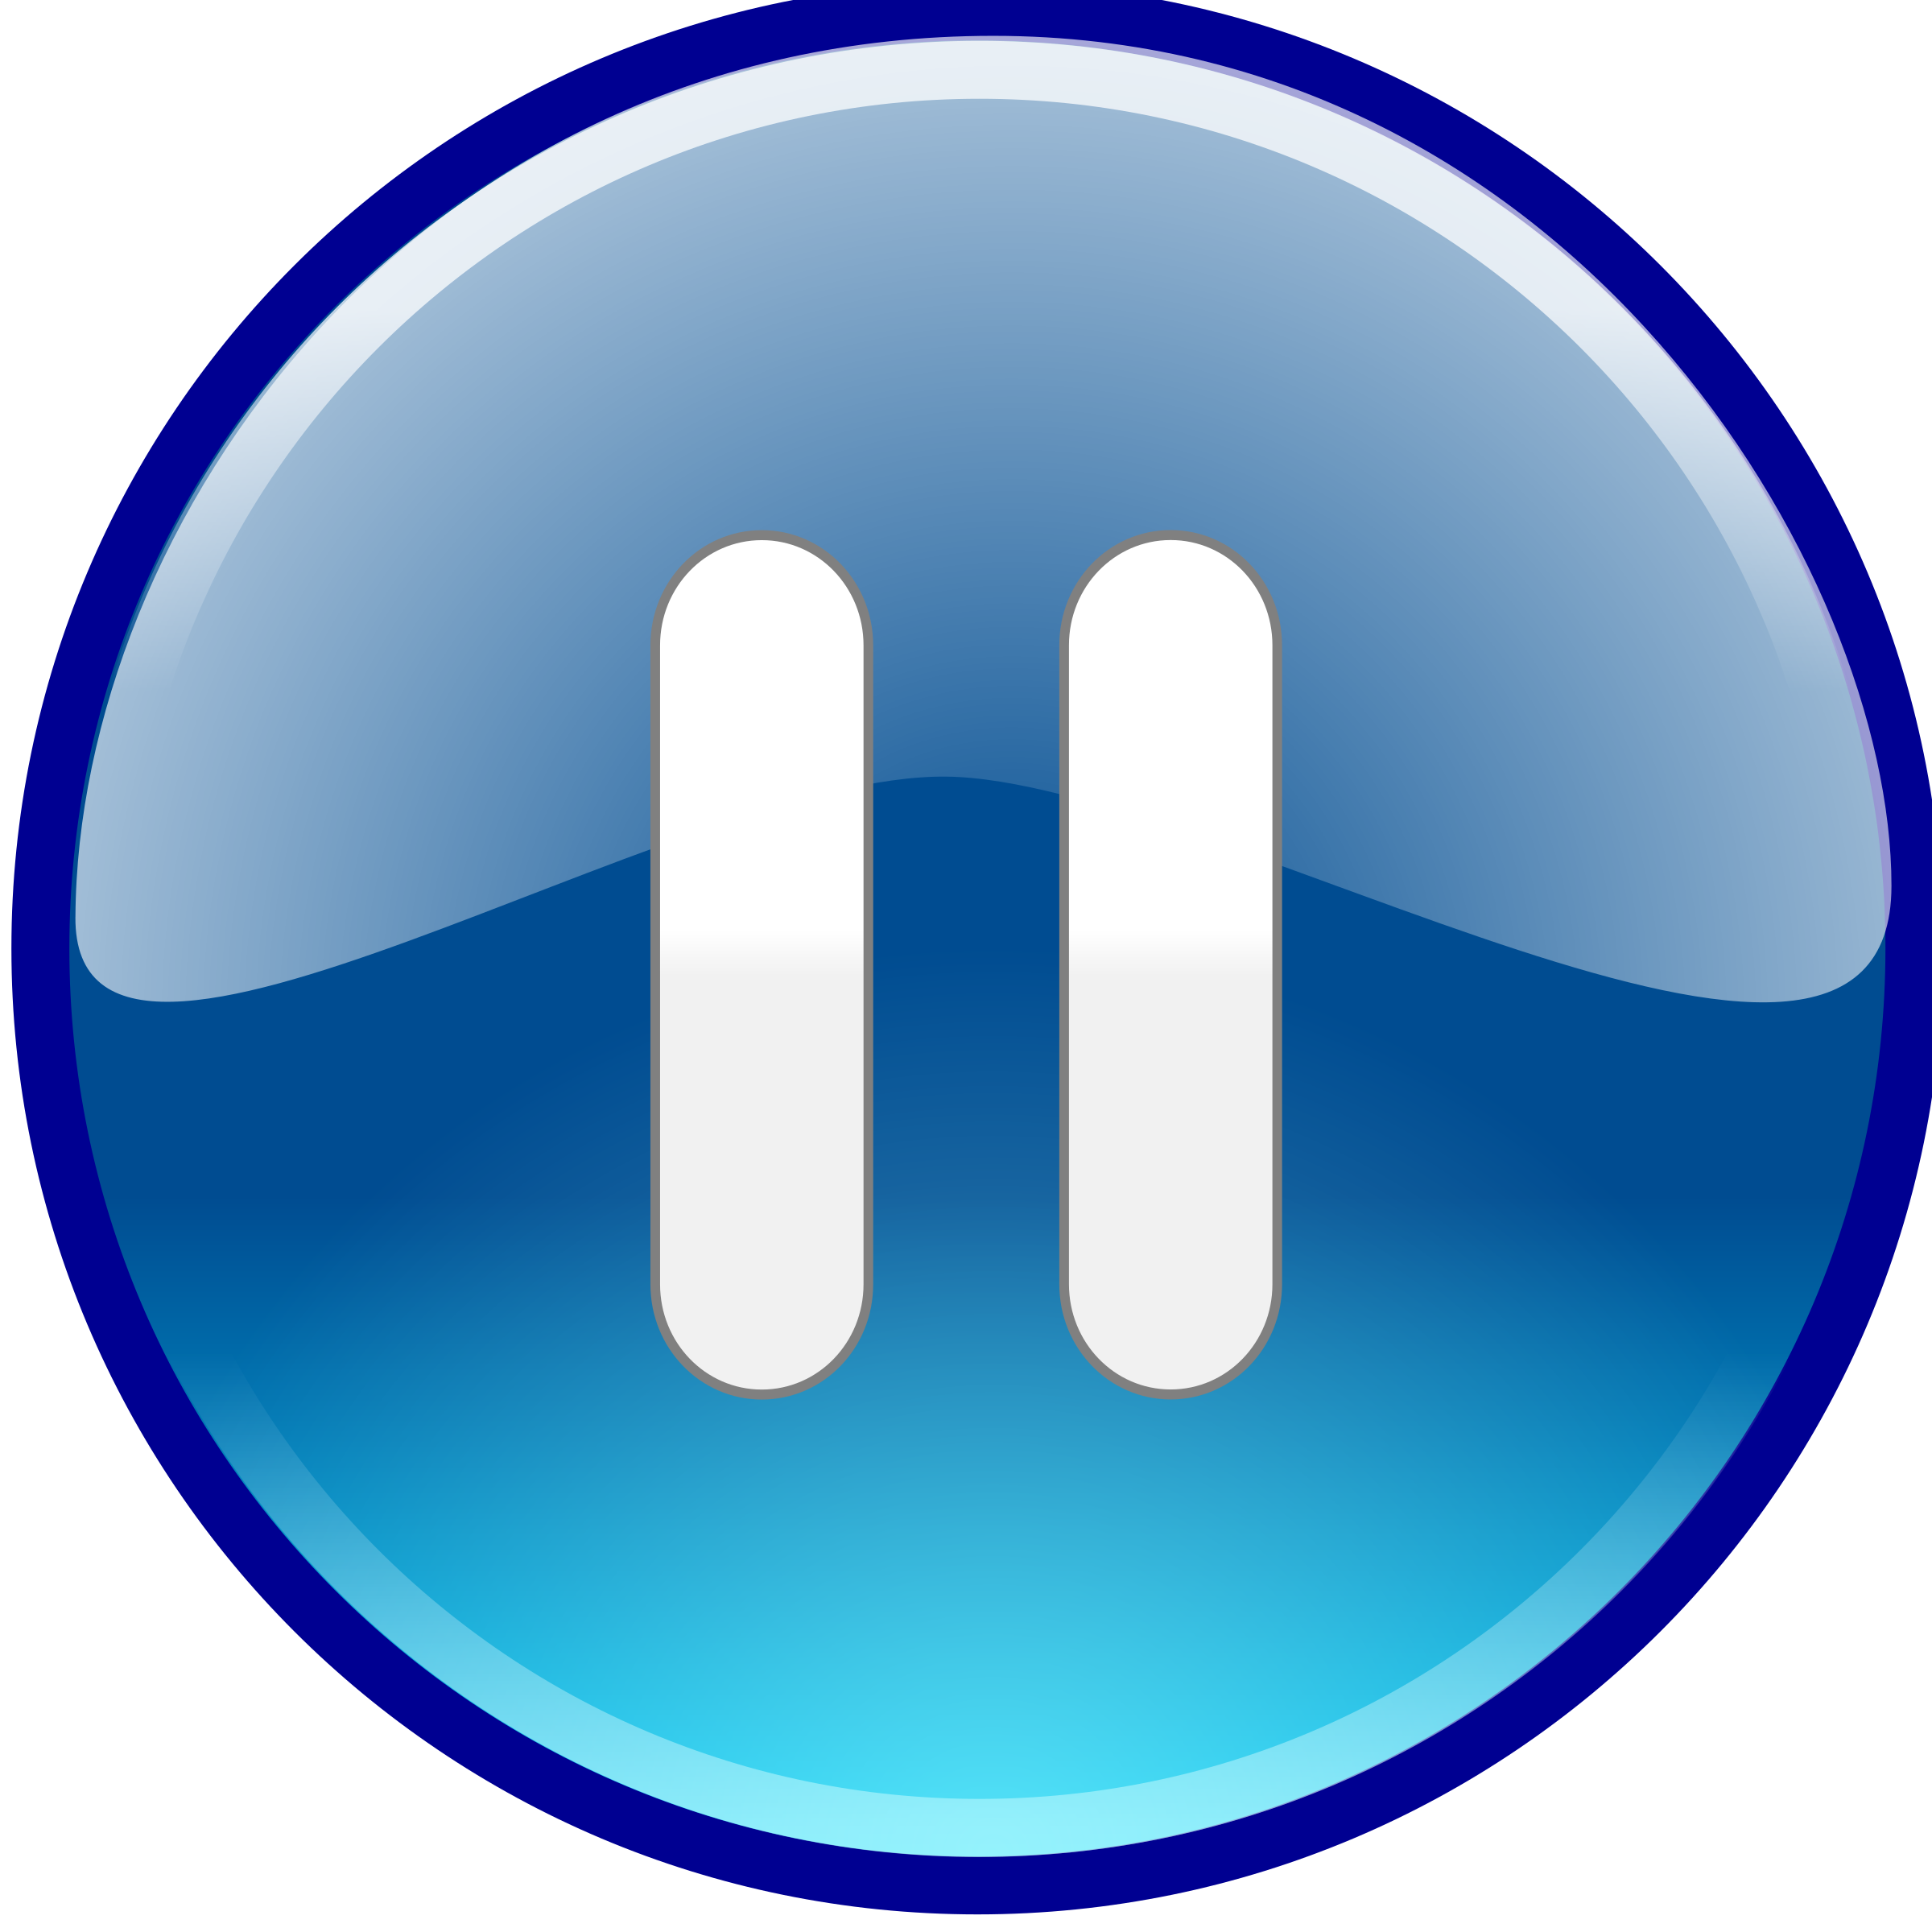 pierna Patatas lobo Windows Media Player Pause Button Icons PNG - Free PNG and Icons Downloads